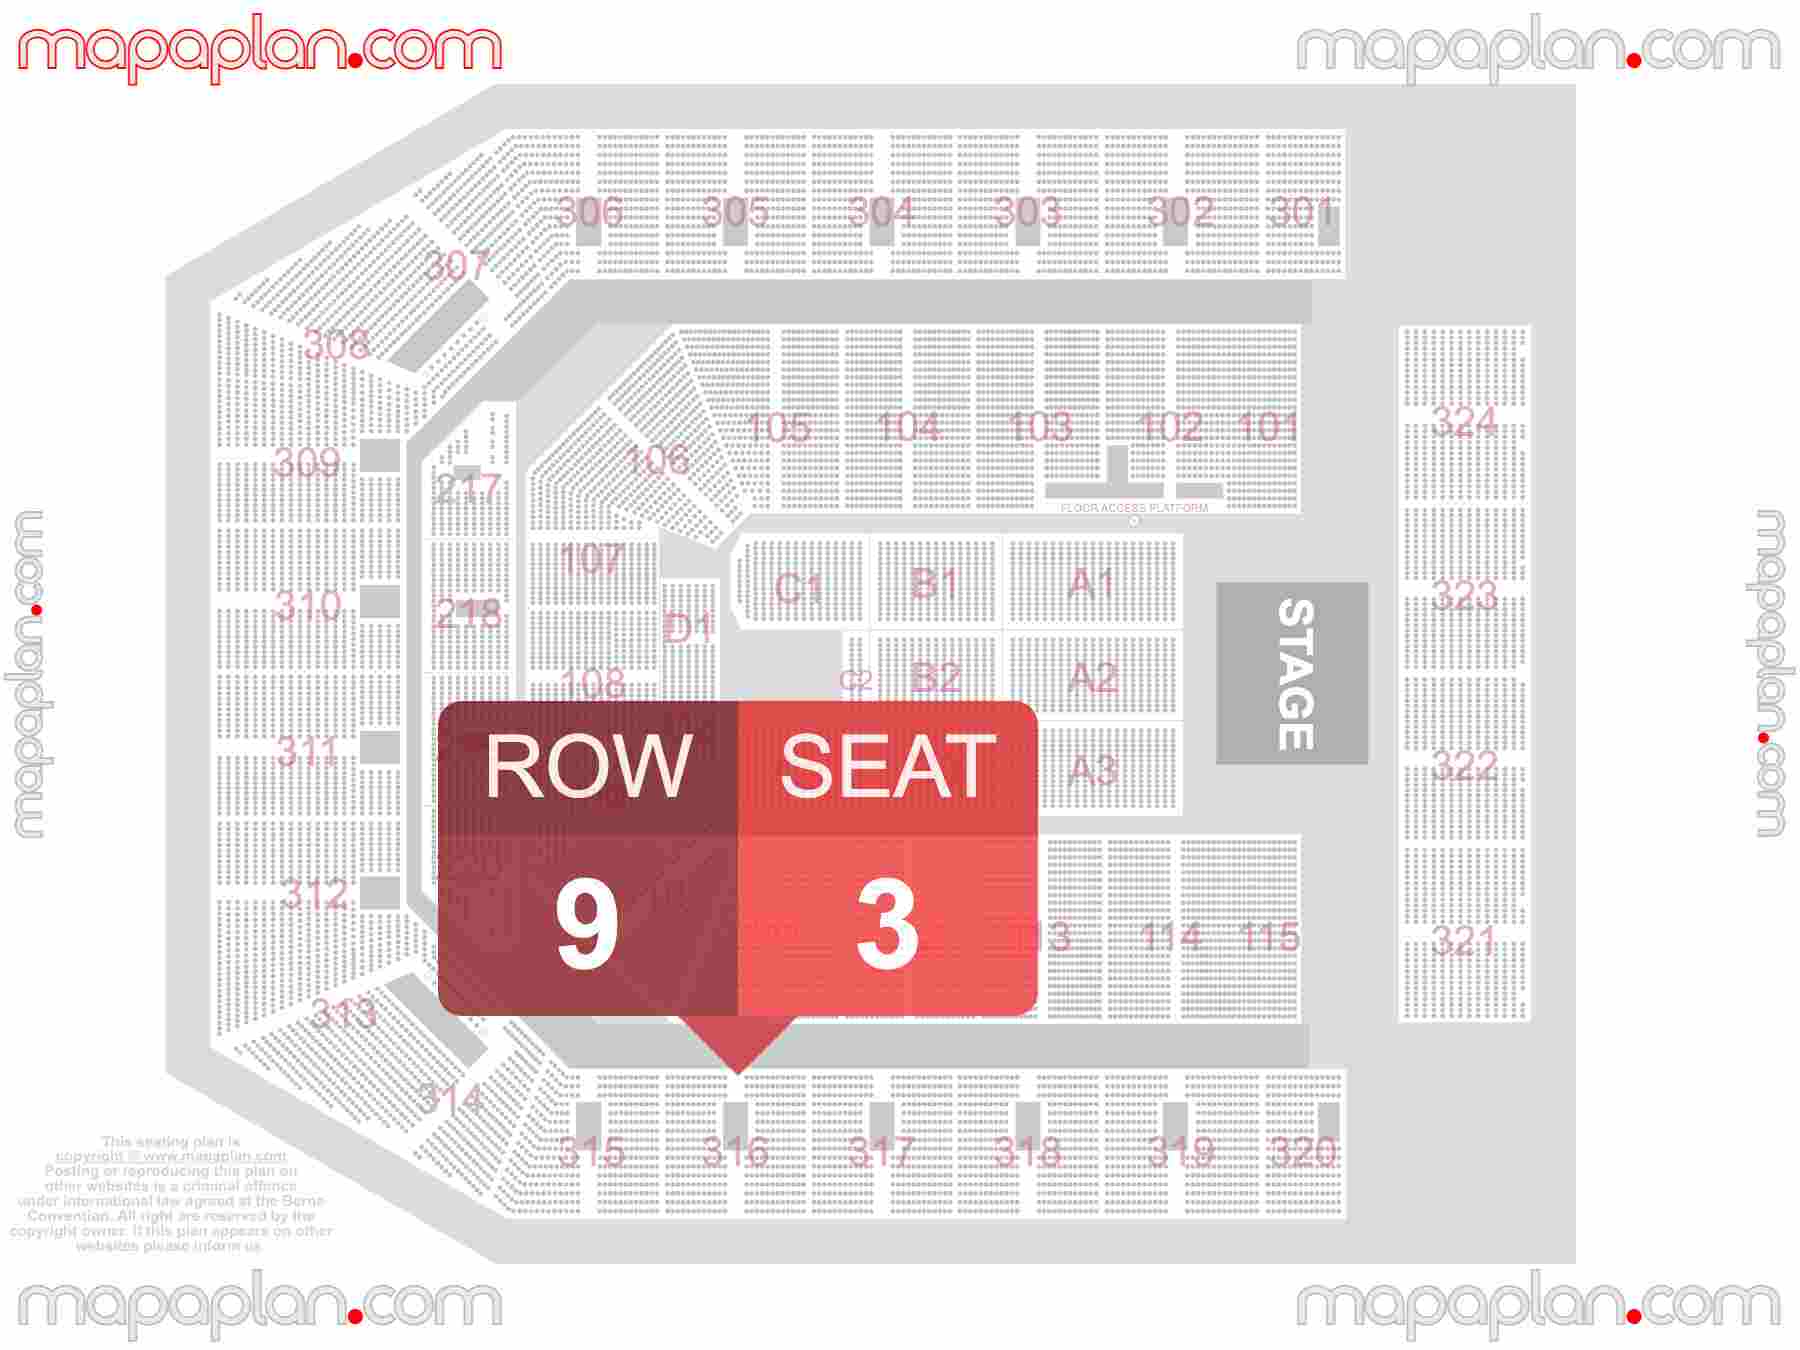 Manchester Co-op Live seating plan Concert detailed seat numbers and row numbering plan with interactive map chart layout